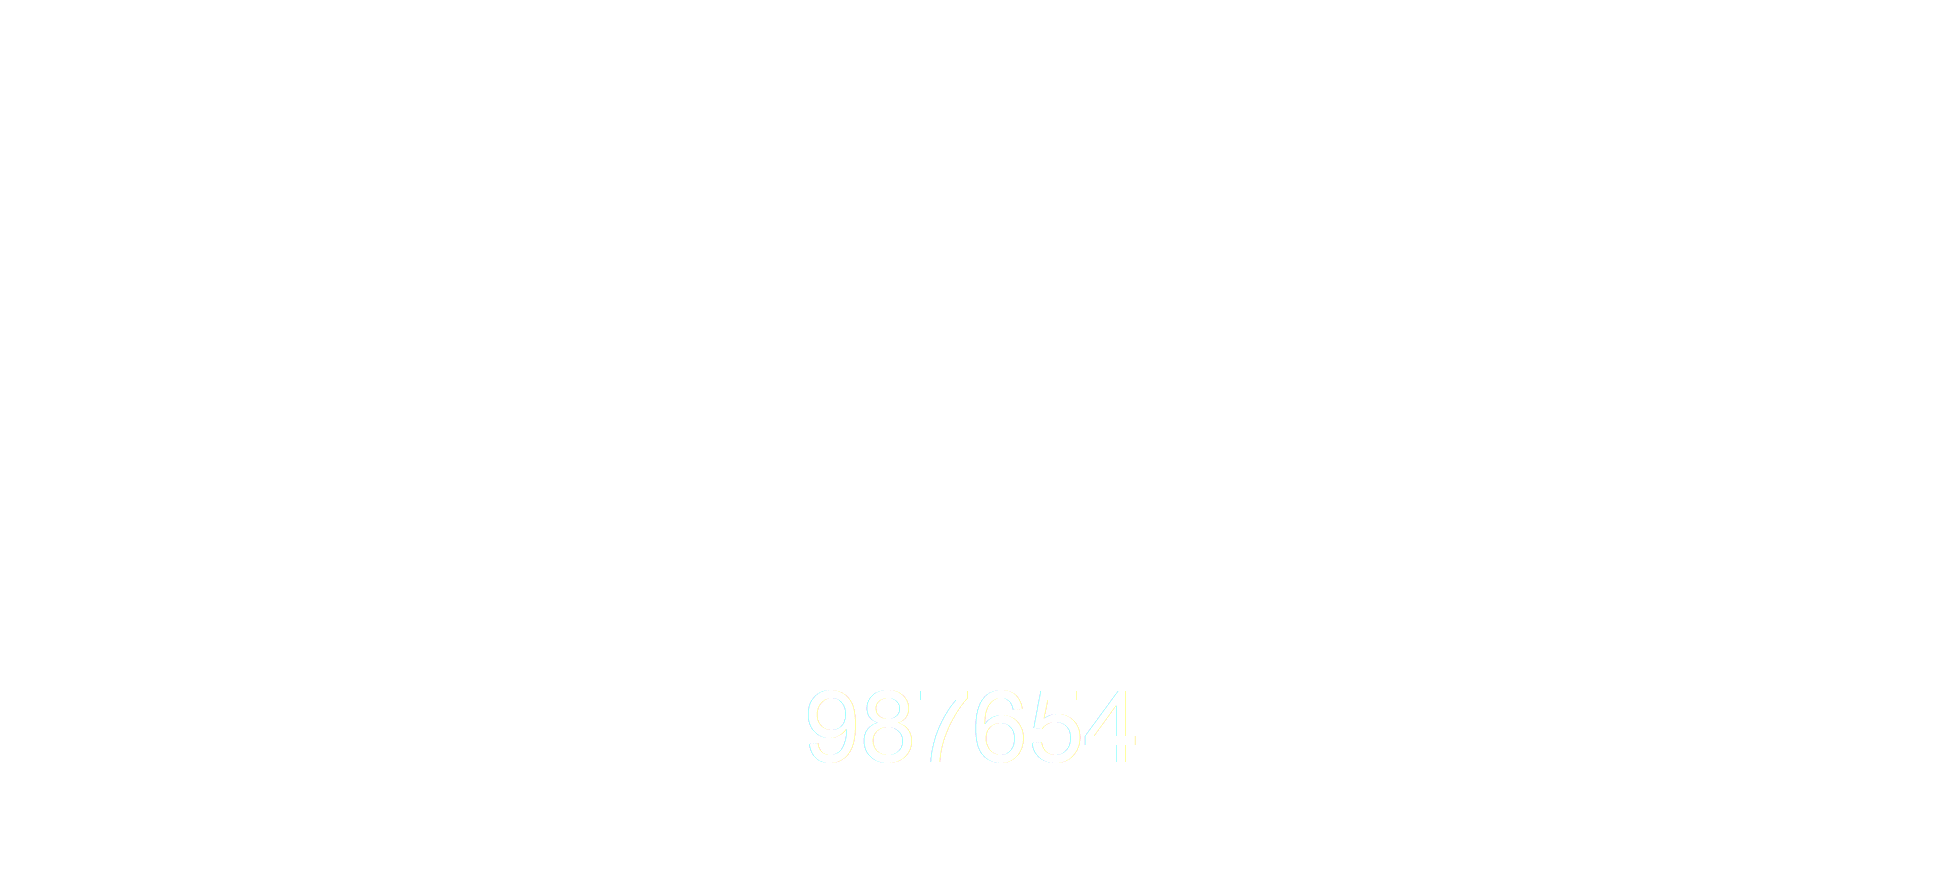 Industrial 2 of 5 sample barcode